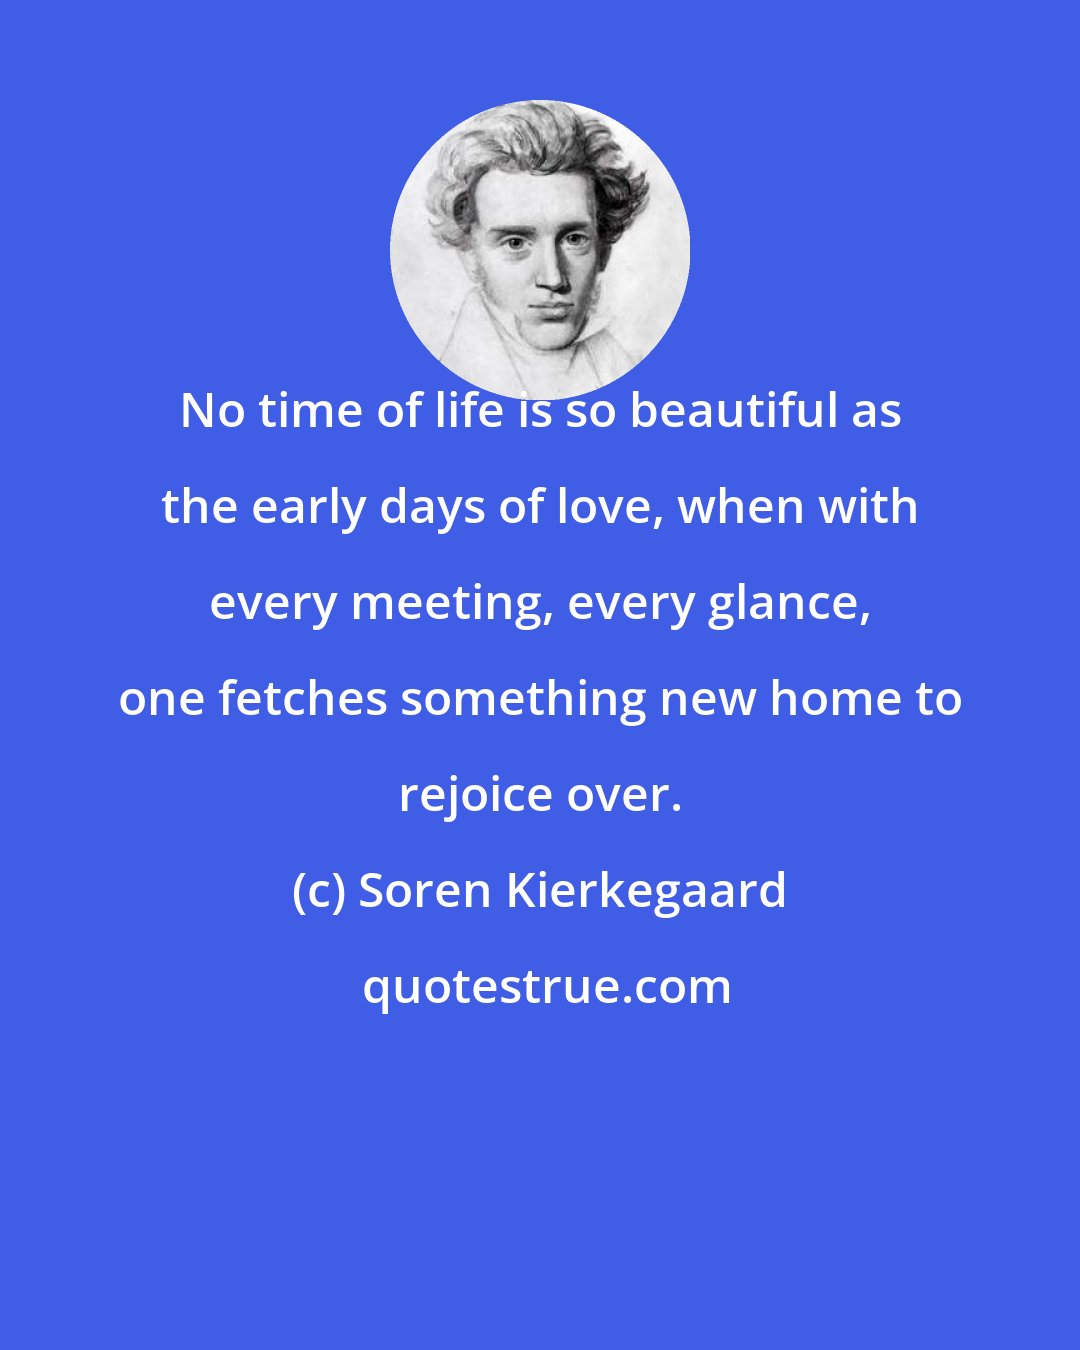 Soren Kierkegaard: No time of life is so beautiful as the early days of love, when with every meeting, every glance, one fetches something new home to rejoice over.